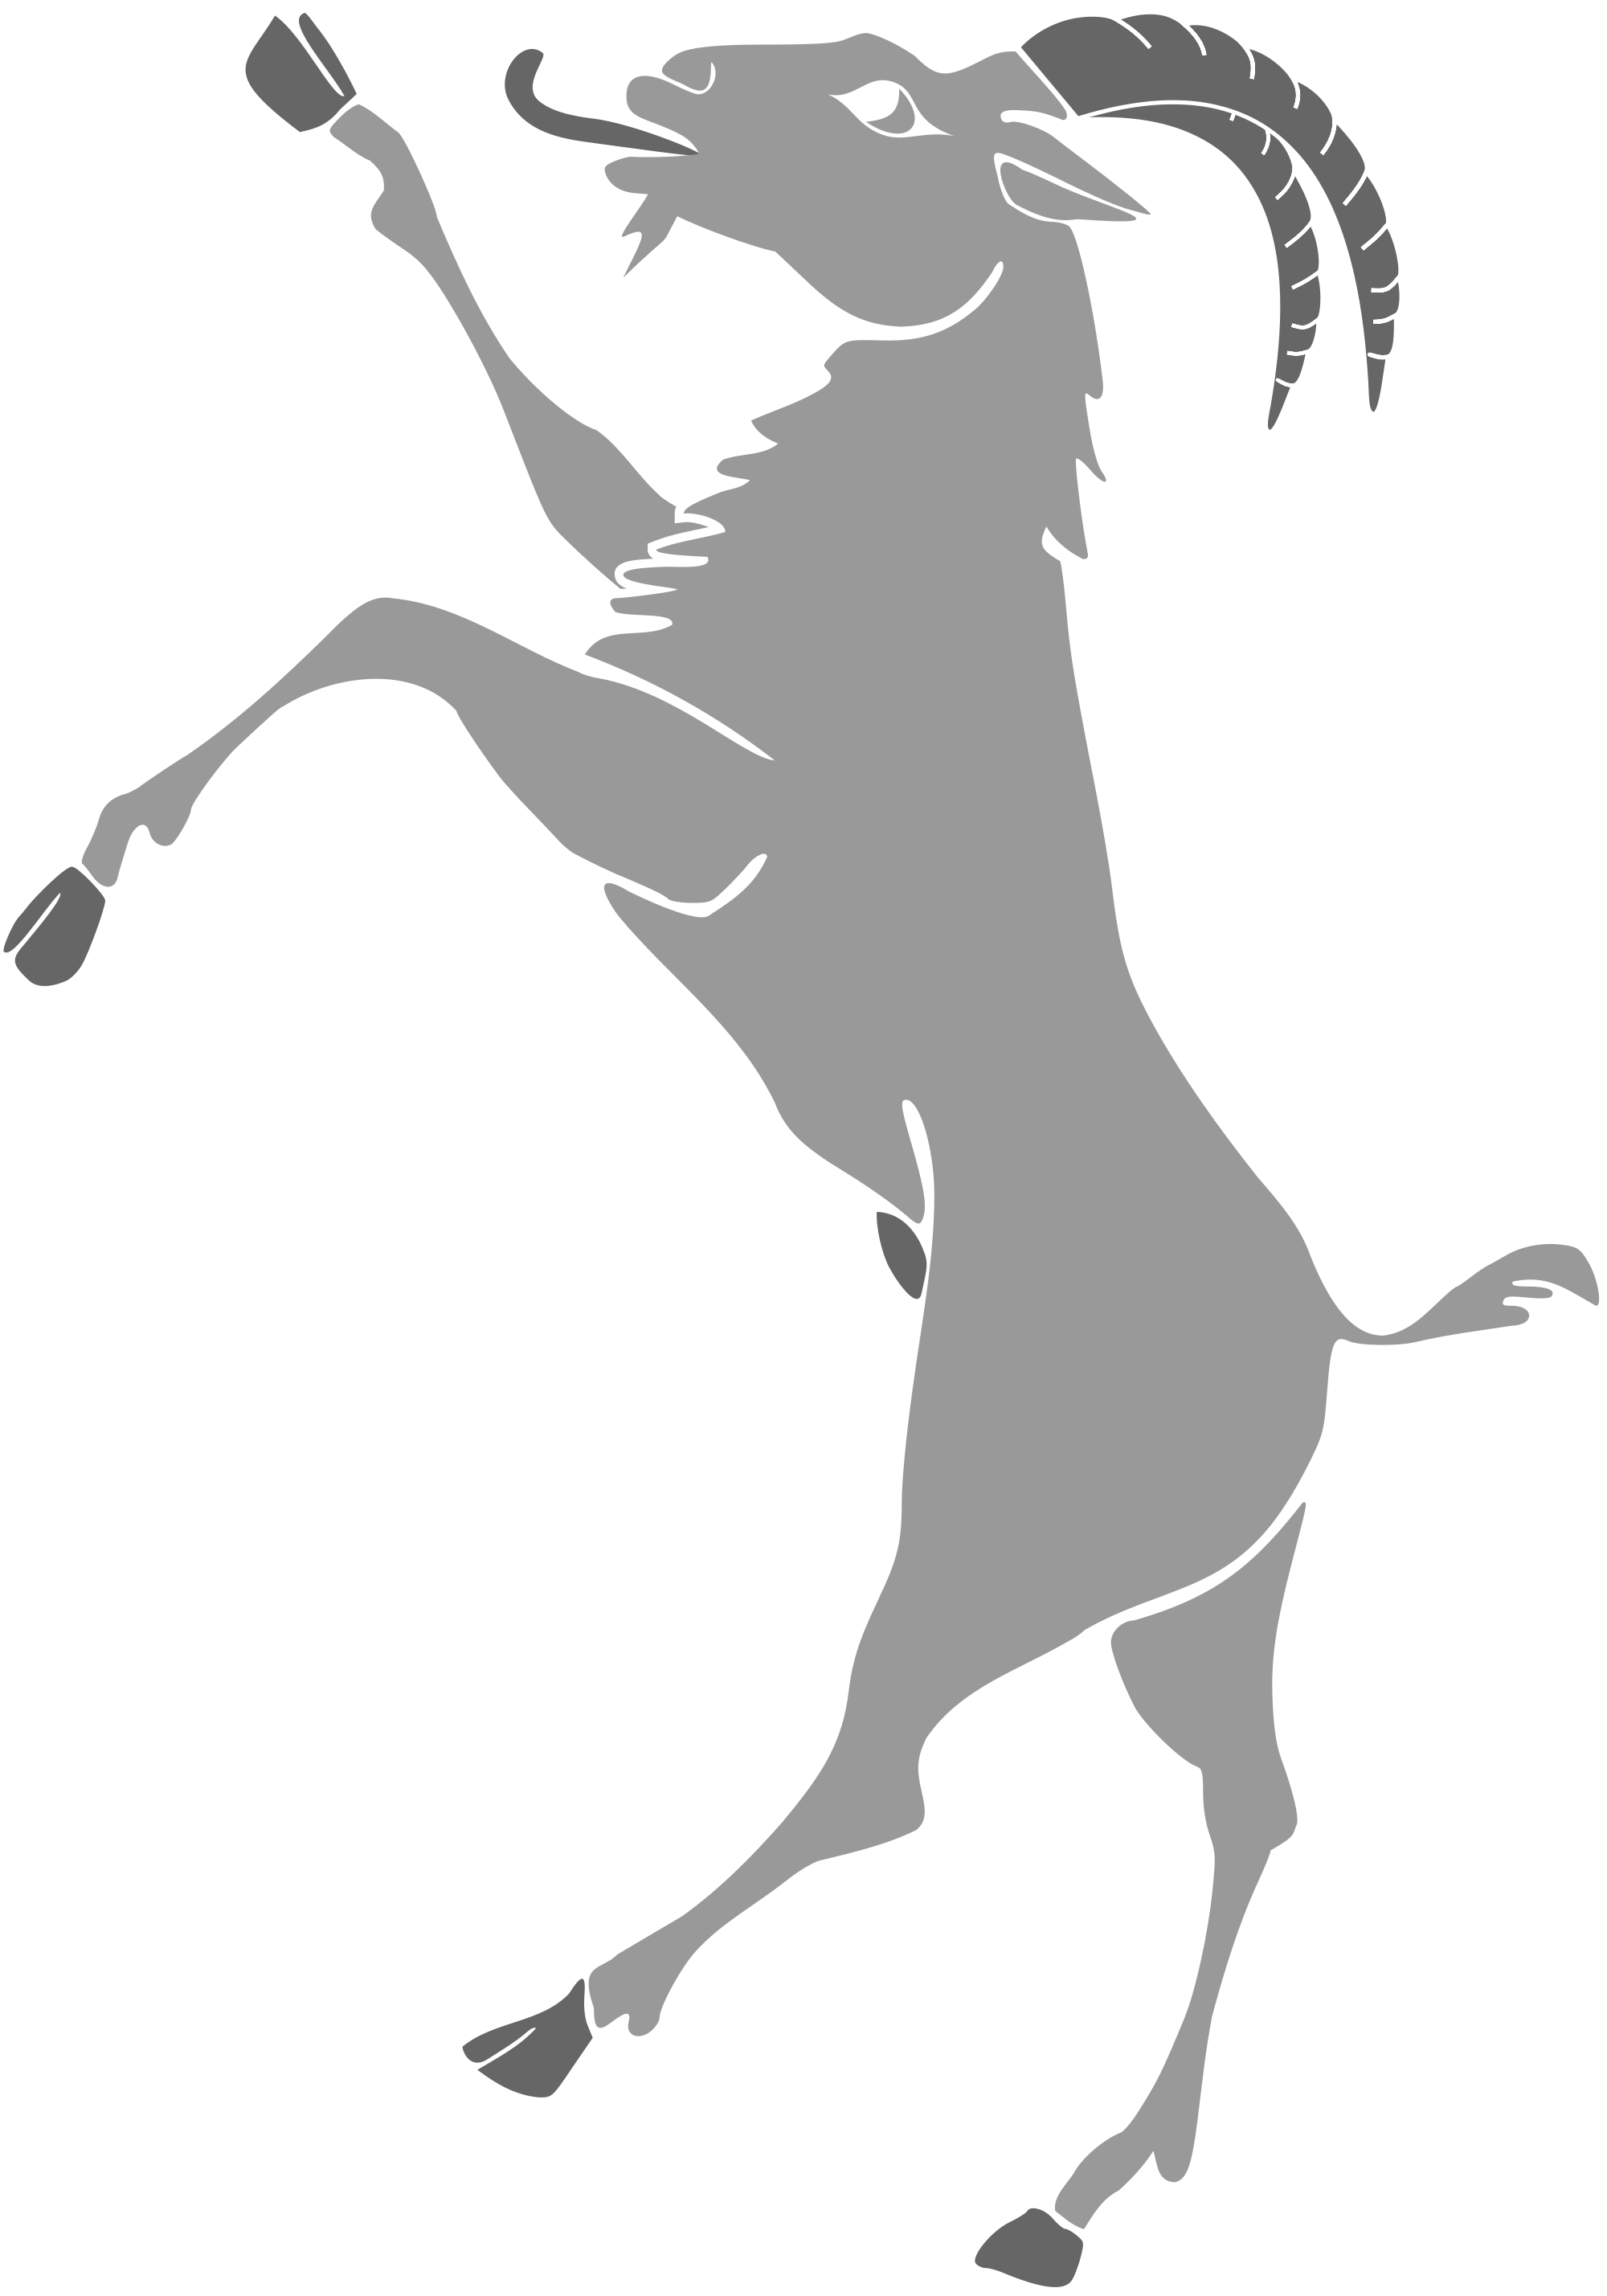 clipart goat jumping